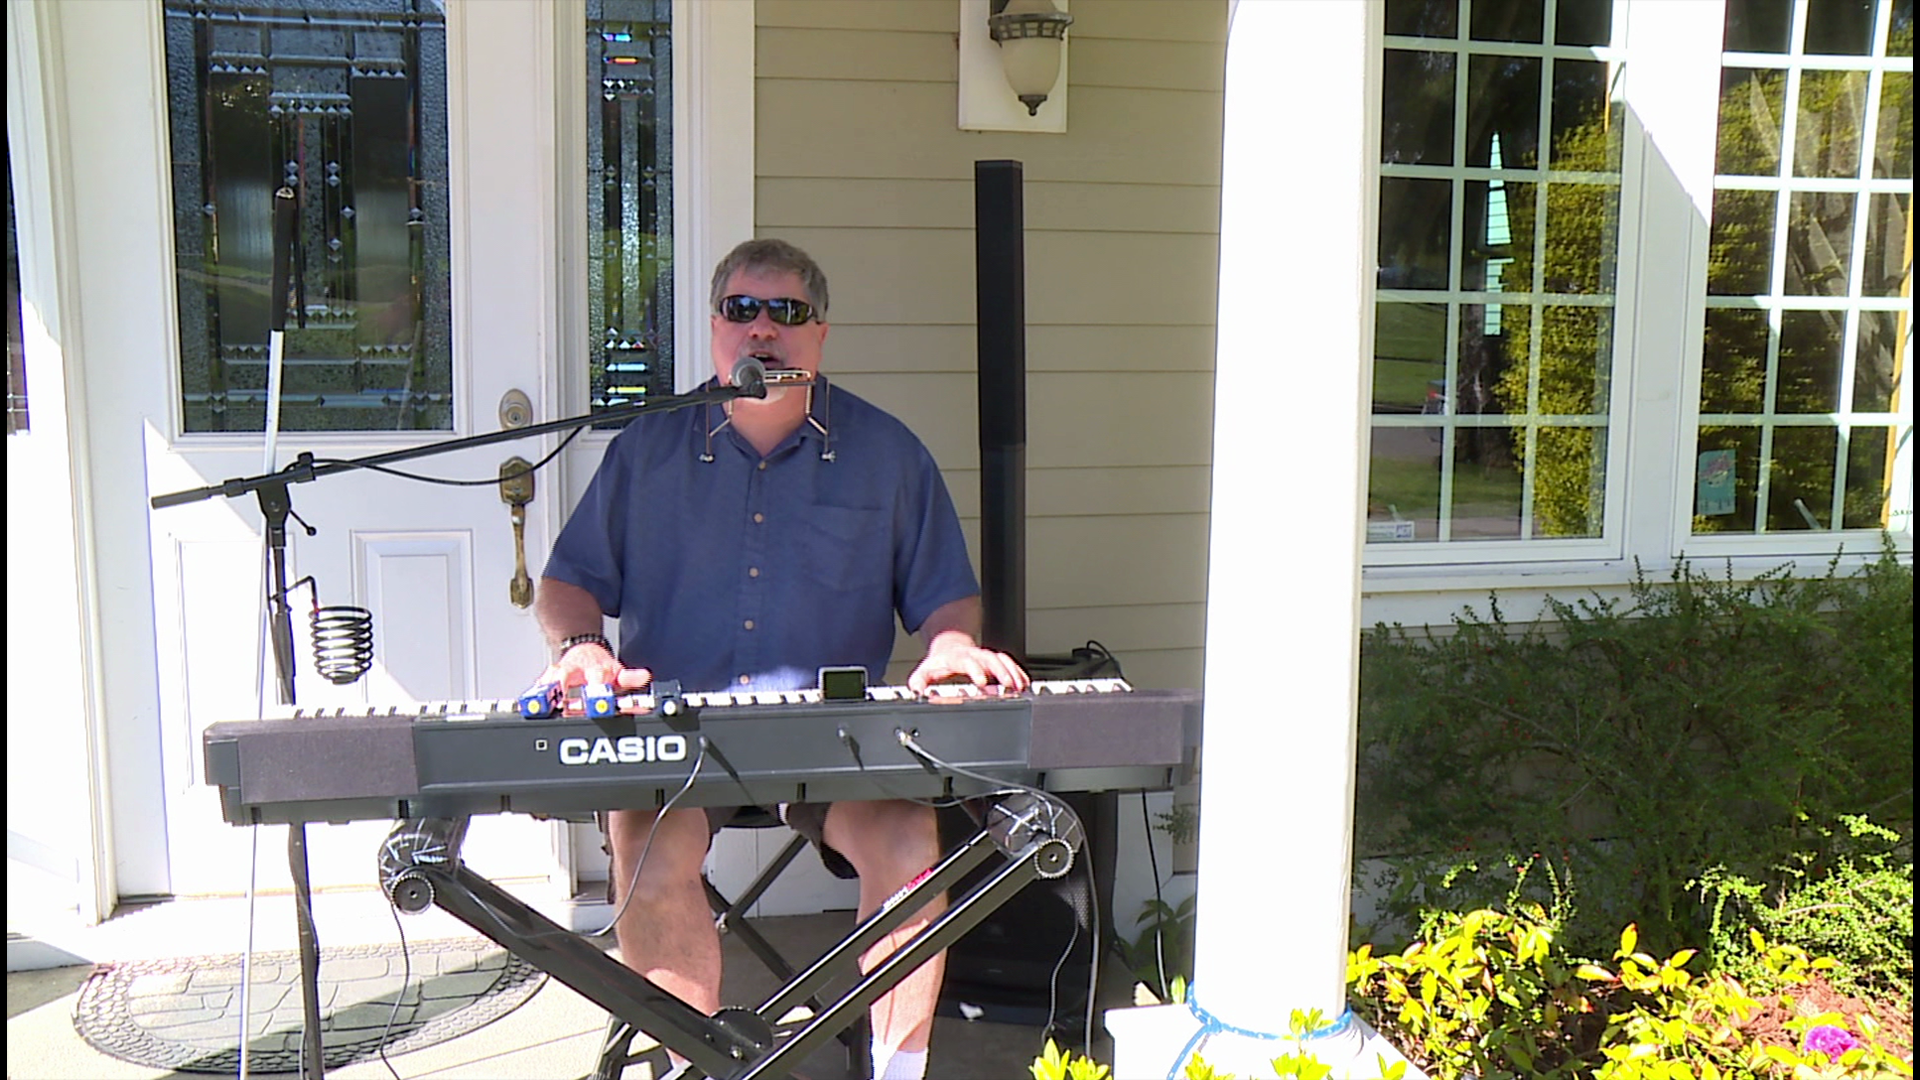 Musician Jim Meck has been covering The Beatles, Billy Joel and more from his front porch